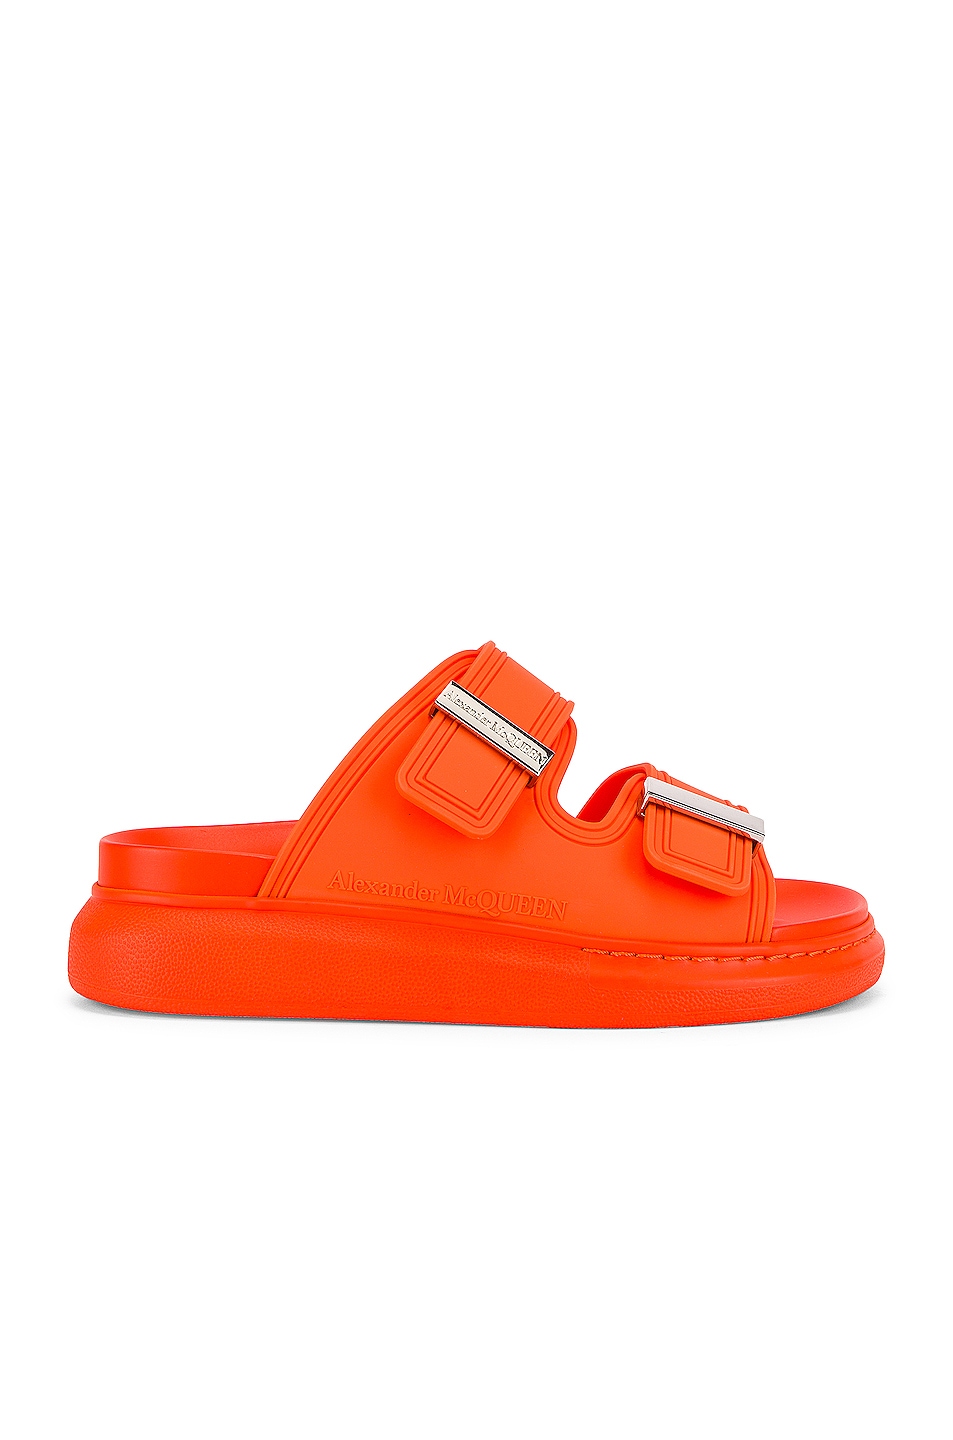 Image 1 of Alexander McQueen Fabric Upper and Rubber Slides in Acrylic Orange & Silver